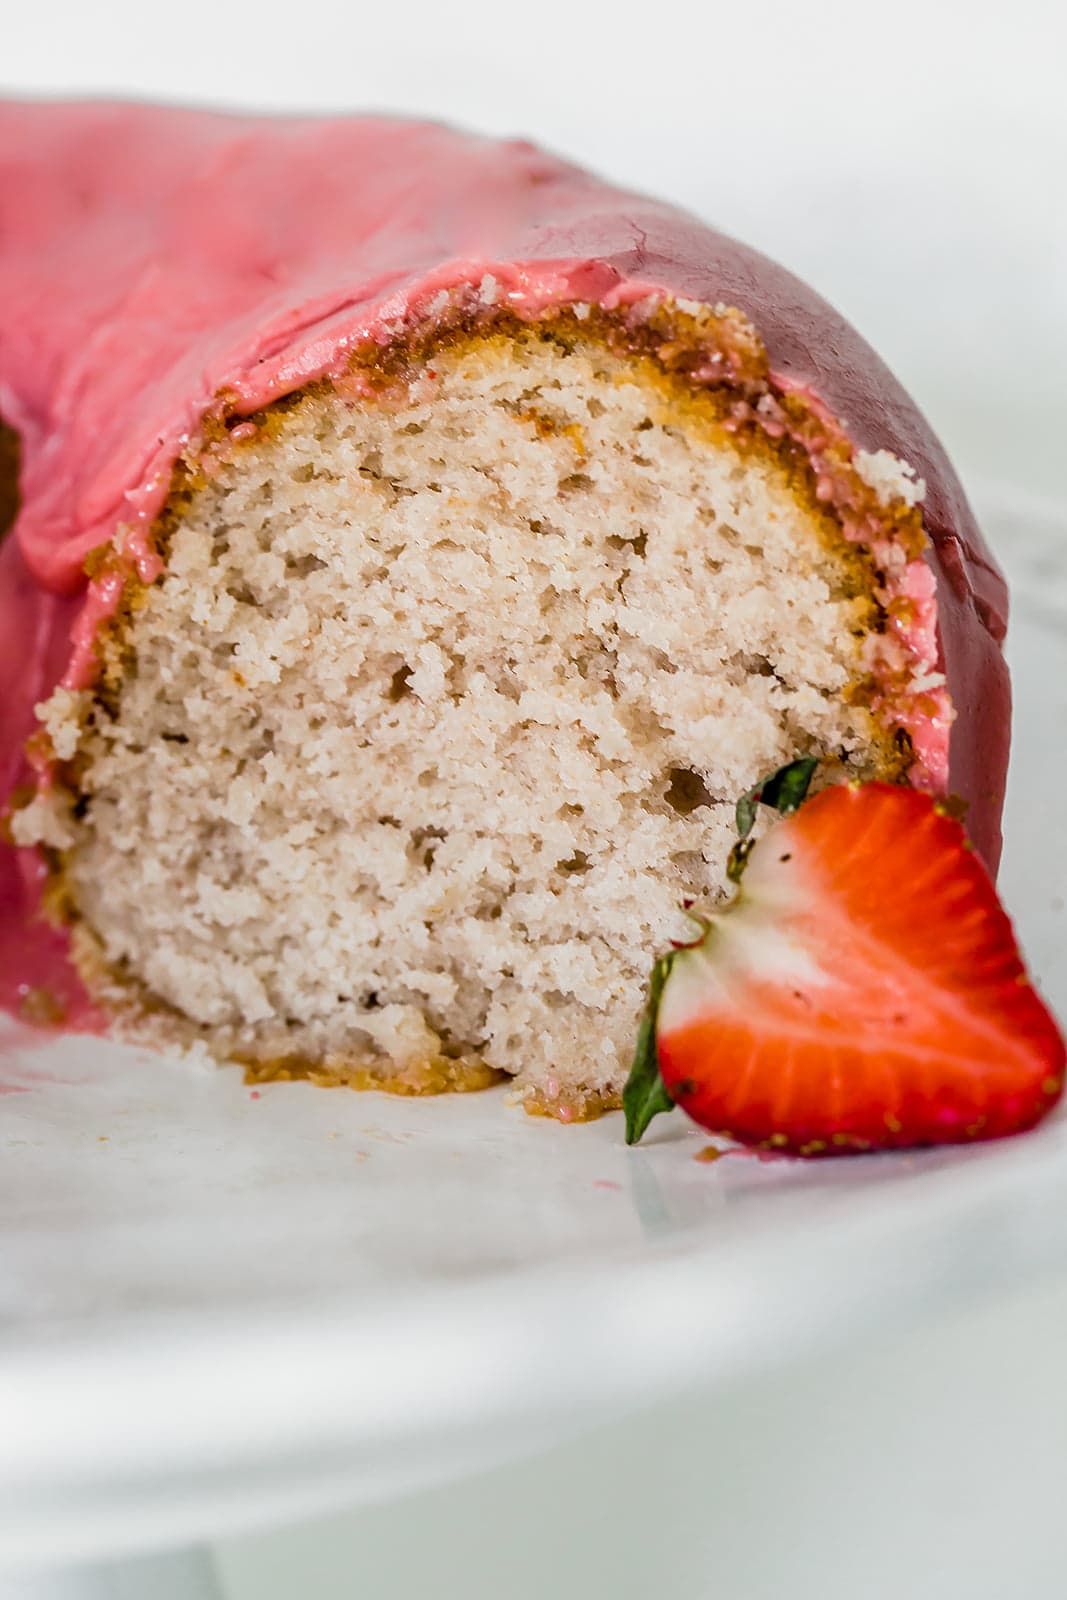 This light, fluffy, and flavorful Strawberry Bundt Cake is made with a fresh strawberry puree and absolutely no artificial colors or flavors! It's the perfect easy yet crowd-pleasing spring or summer cake.